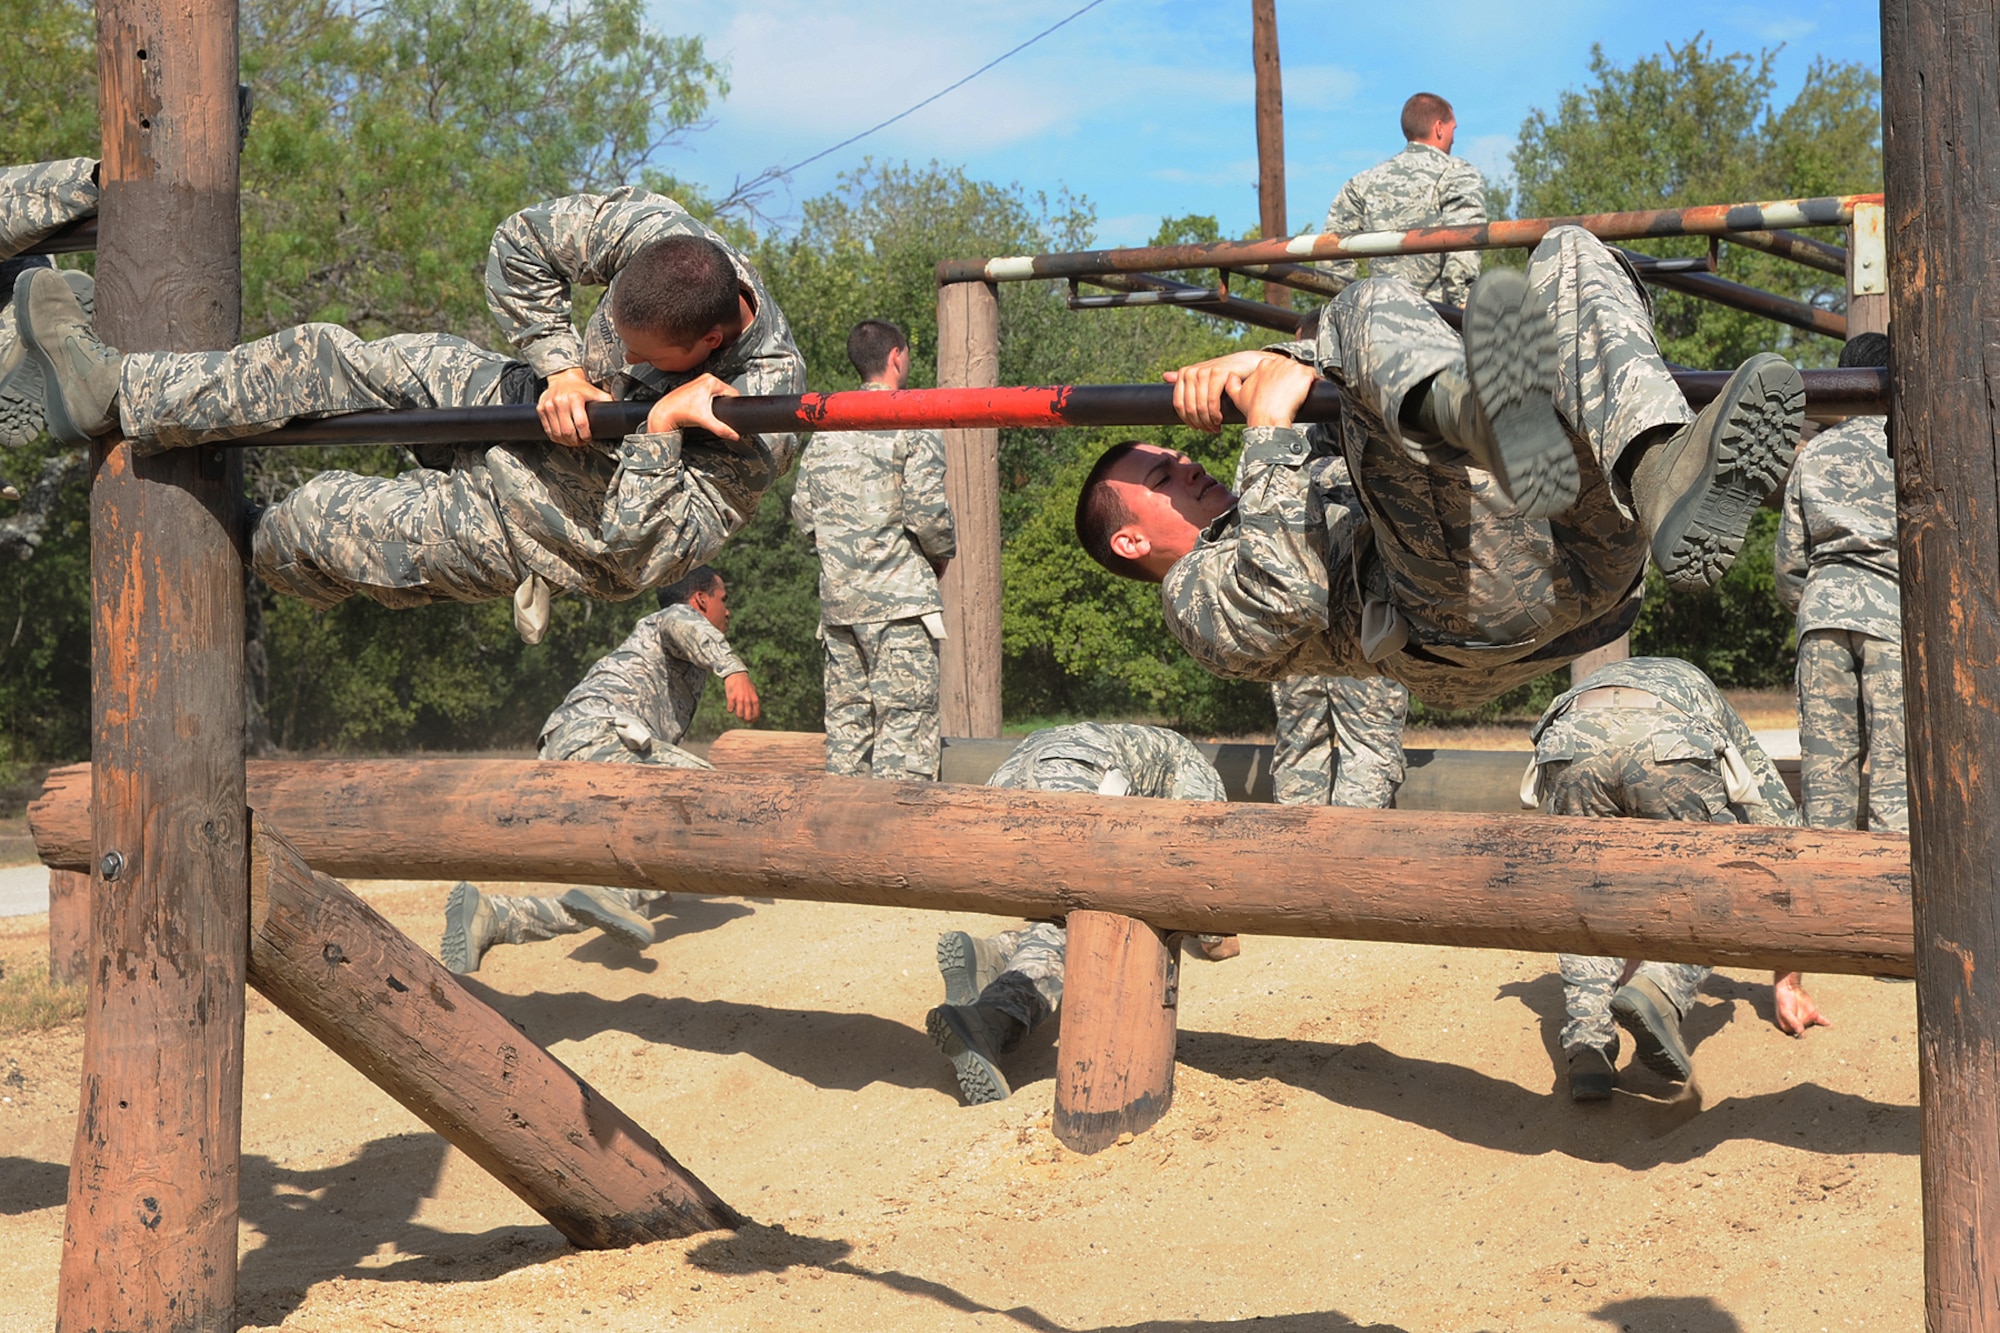 Basic military trainees swing around a bar as part of the basic military training obstacle course Sept. 24, 2014, at Joint Base San Antonio-Lackland, Texas. The obstacle course was approximately 1.5 miles long depending on what 14 obstacles were open. The course was permanently closed the same day and new one was integrated into the Creating Leaders, Airmen, and Warriors program, and became fully operational Sept. 29. (U.S. Air Force photo/Senior Airman Krystal Jeffers)